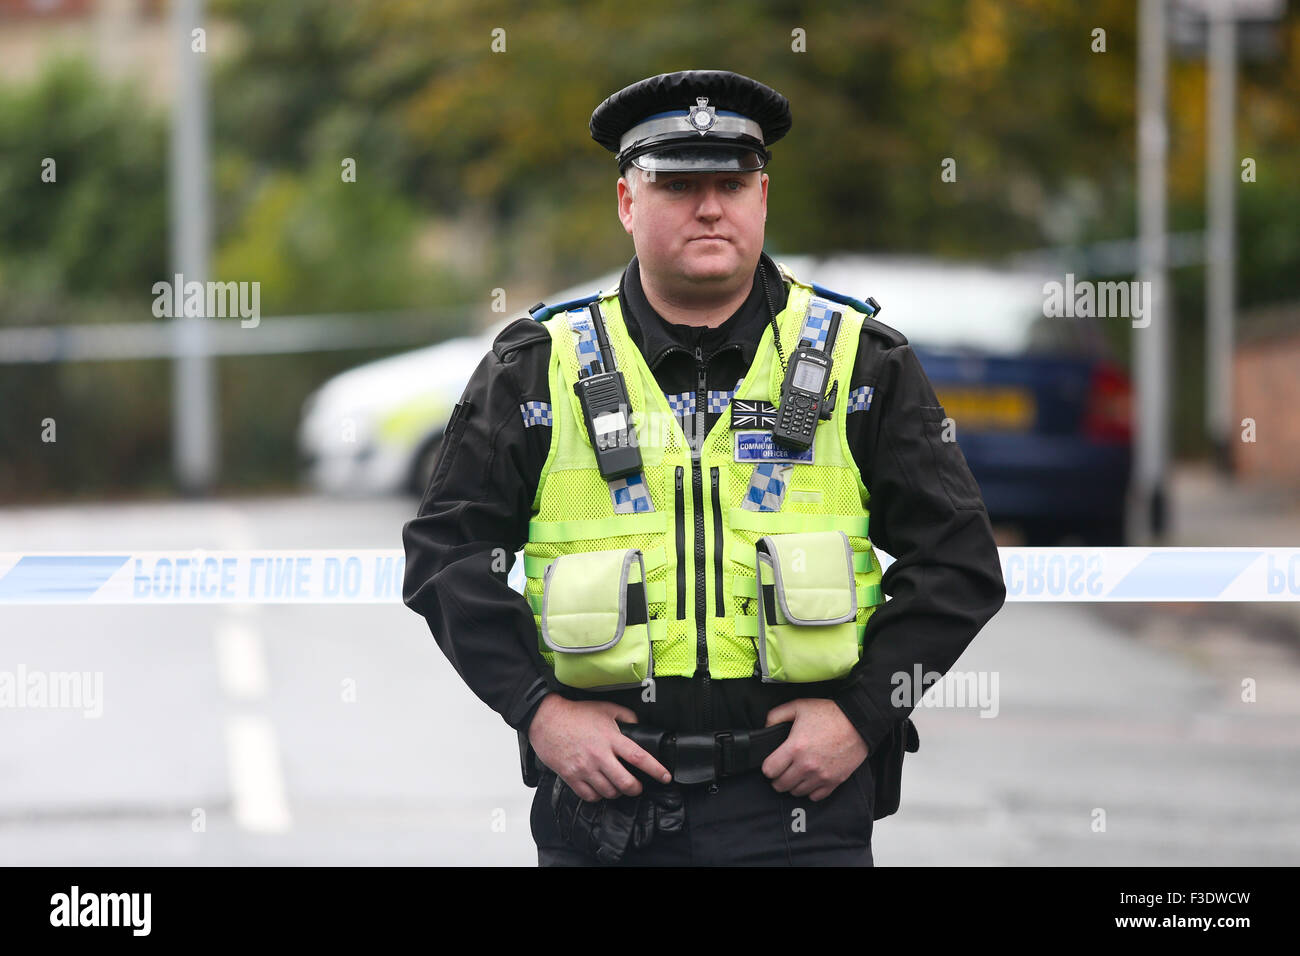 Police guard the scene of a murder in Leeds, West Yorkshire, on October 6th 2015. Police were called to Moorfield Avenue in Armley, Leeds, UK late last night. Officers searched the area and found a 27-year-old man in Back Moorfield Terrace. Although paramedics treated the man, he was pronounced dead at the scene. A 43-year-old man has been arrested on suspicion of murder and is currently in custody.  Ian Hinchliffe /Alamy Live News Stock Photo